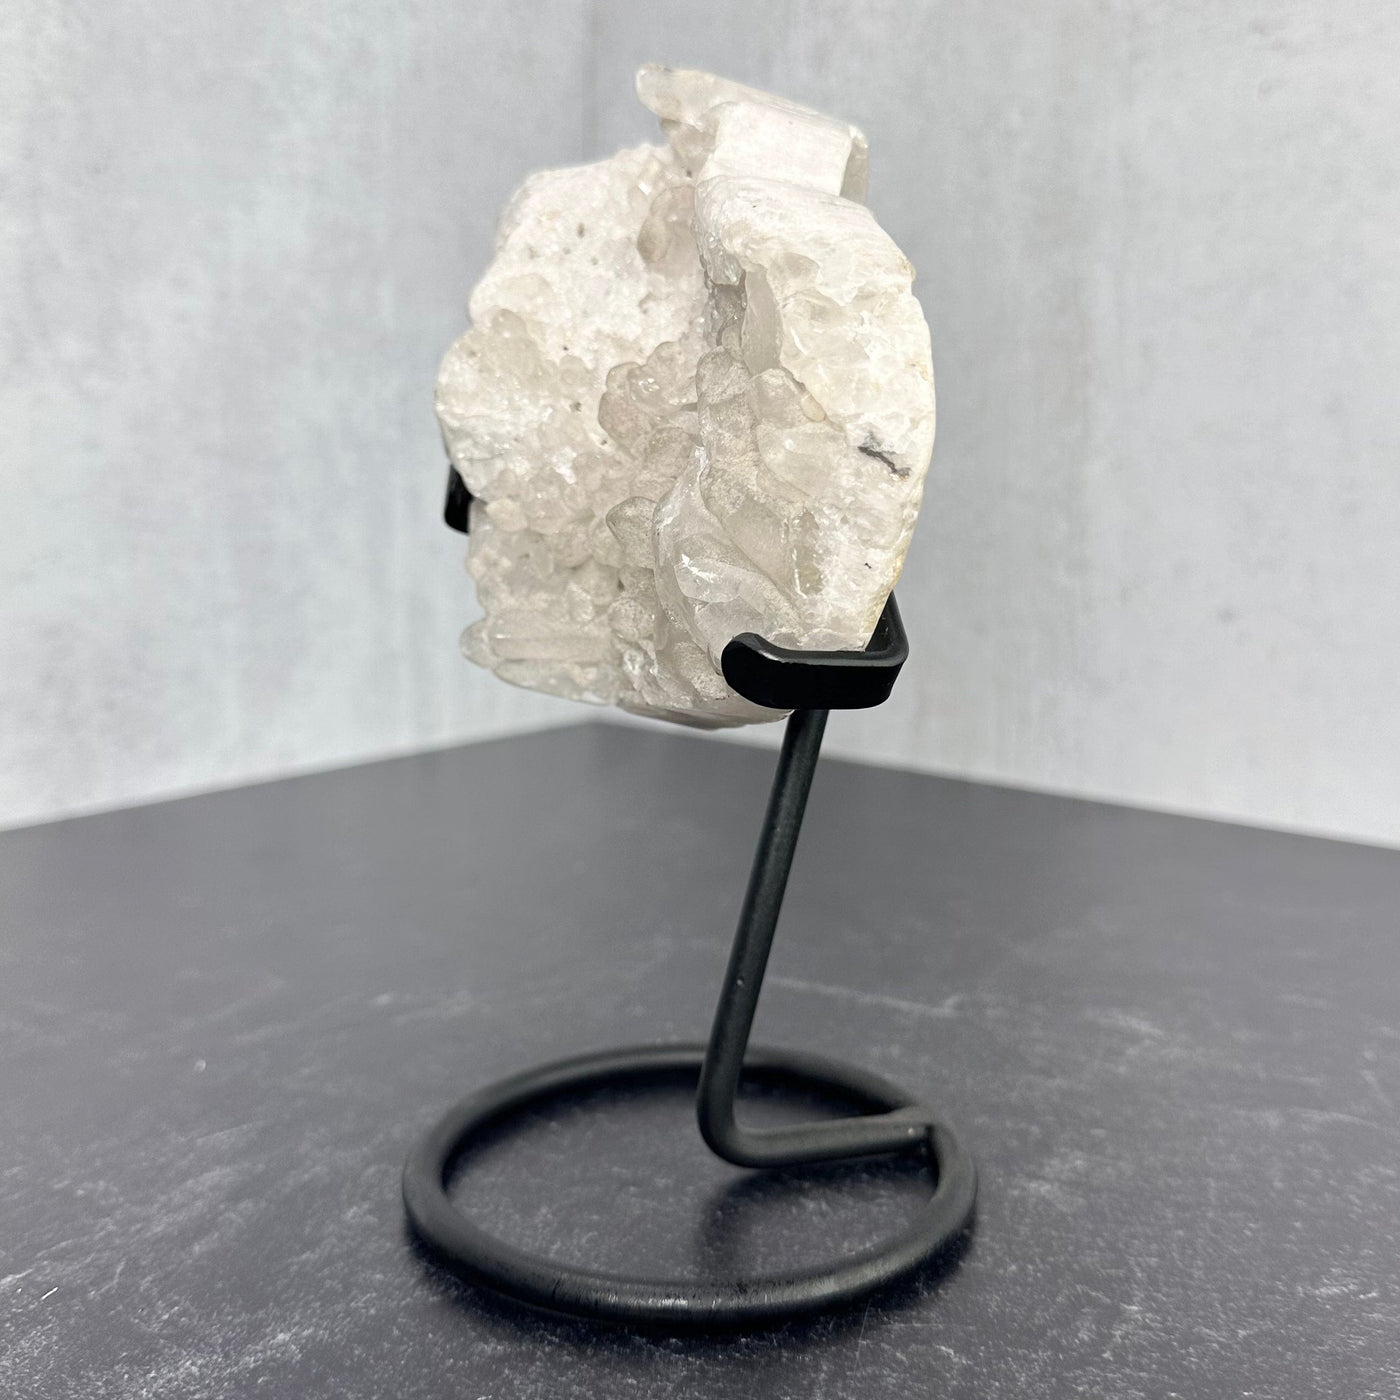 Left profile view of Crystal Quartz Abstract Heart on Metal Stand.